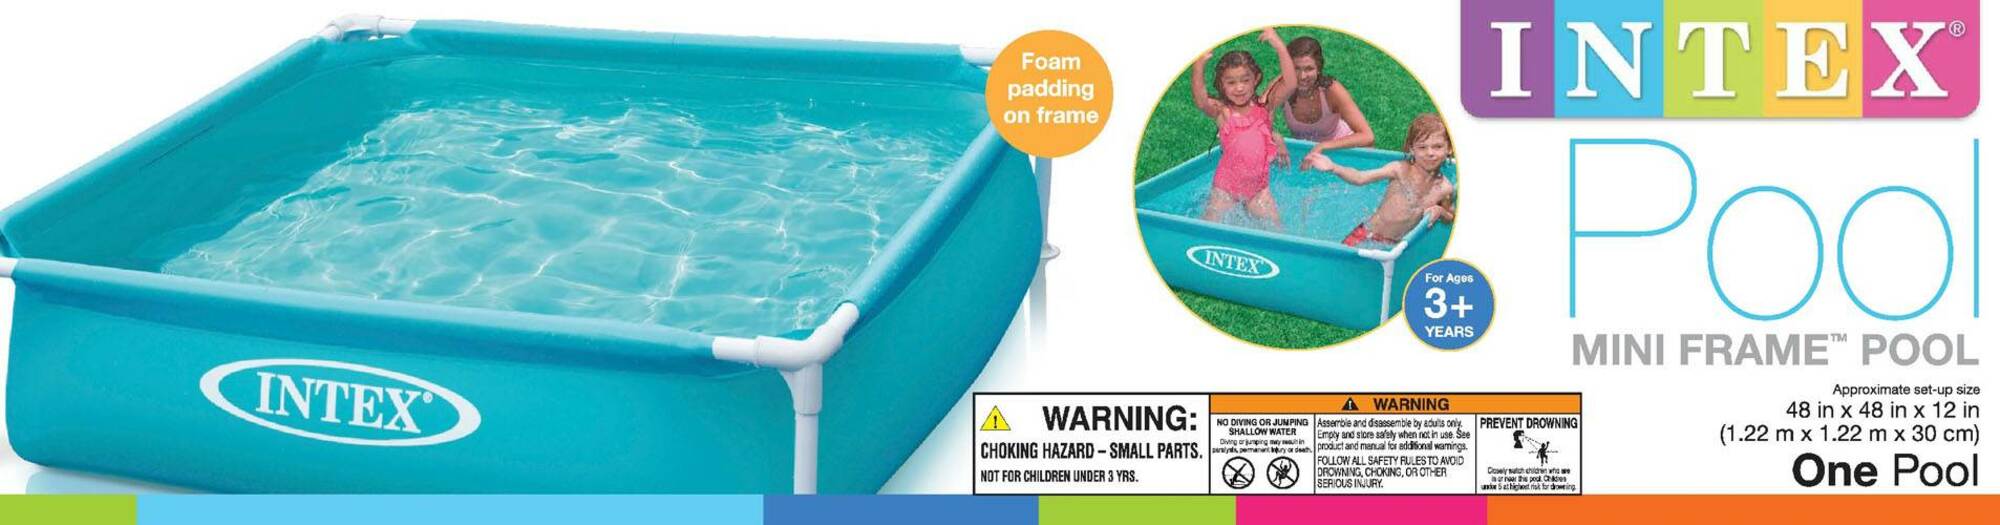 Intex 4-ft x 4-ft x 12-in Metal Frame Rectangle Above-Ground Pool in ...